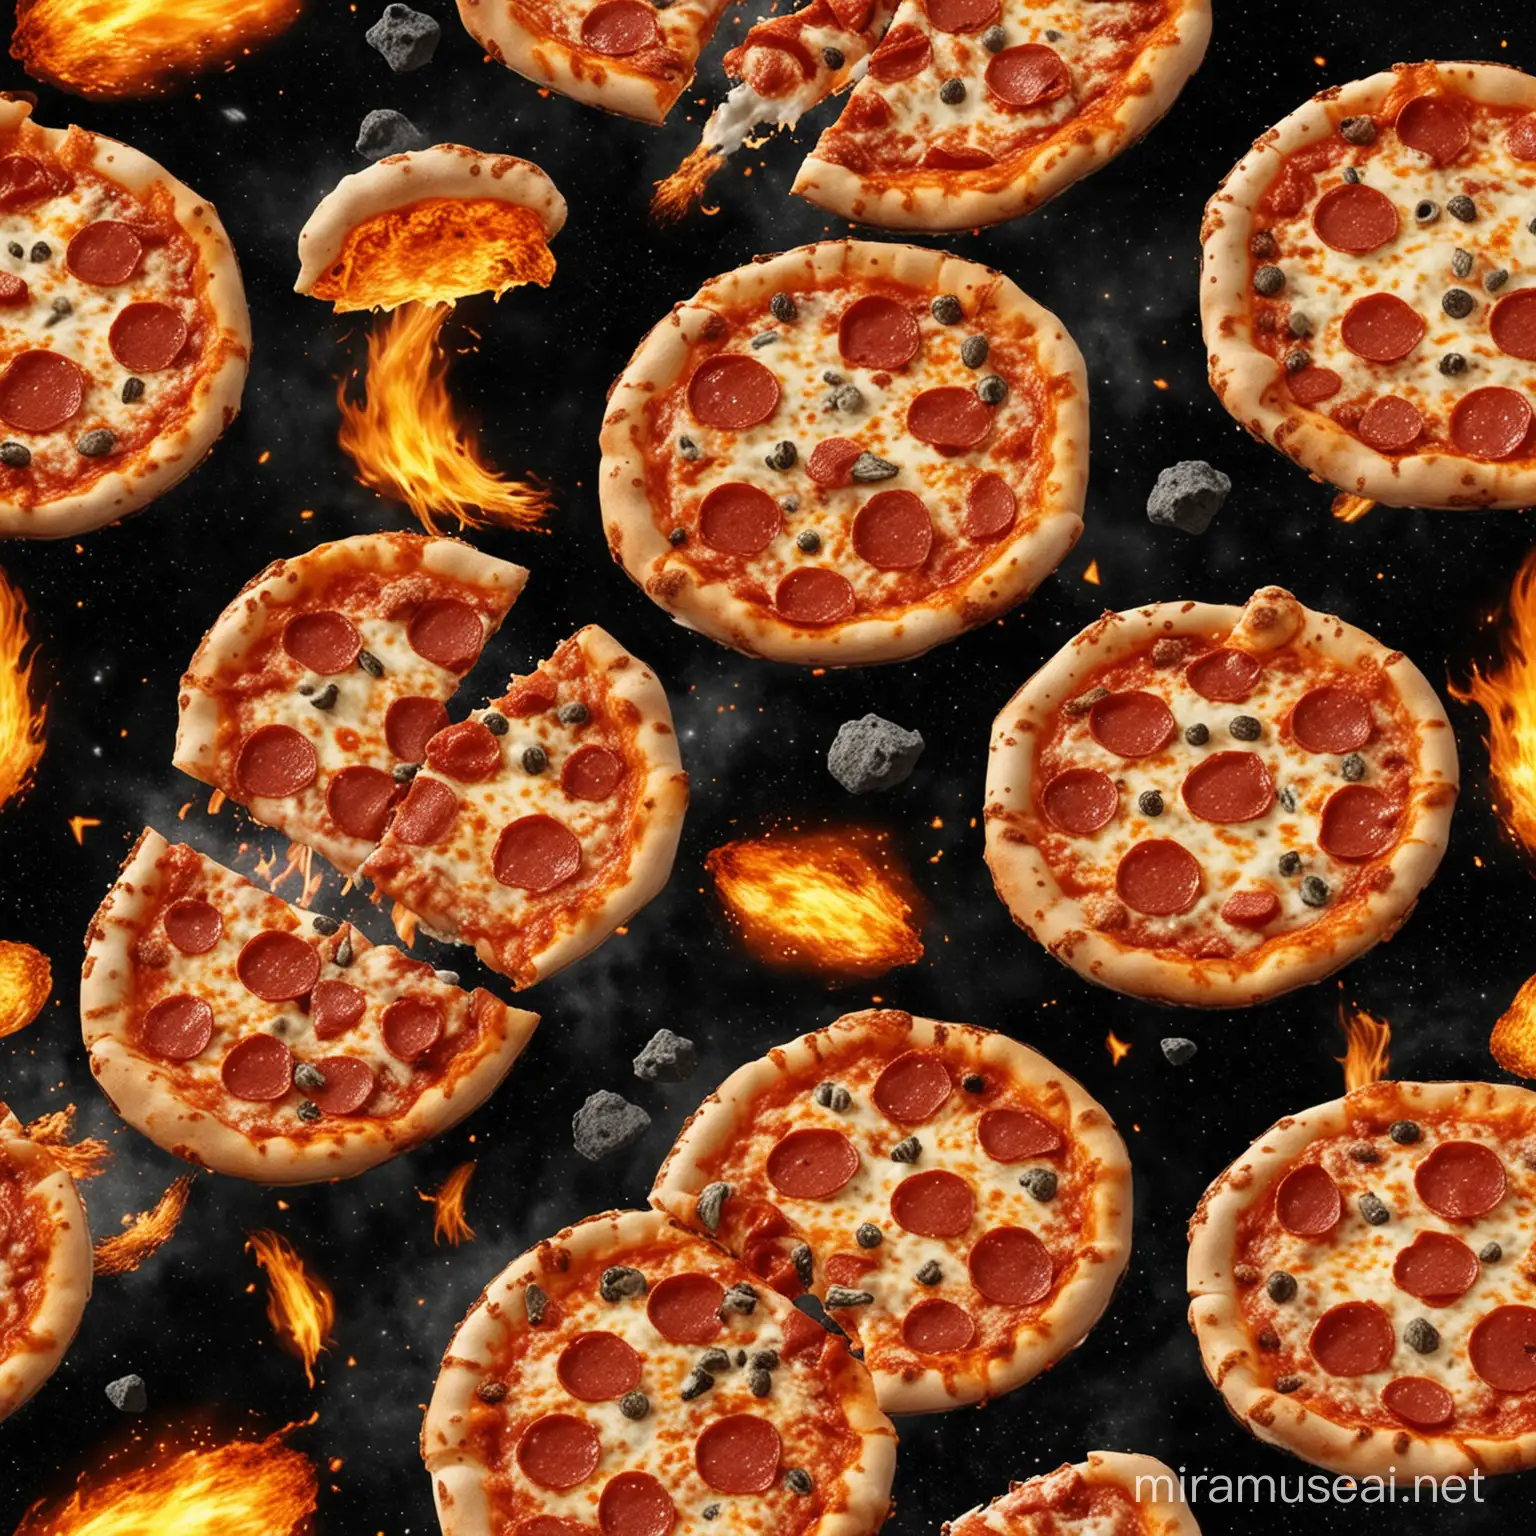 Sizzling Space Pizza Rock